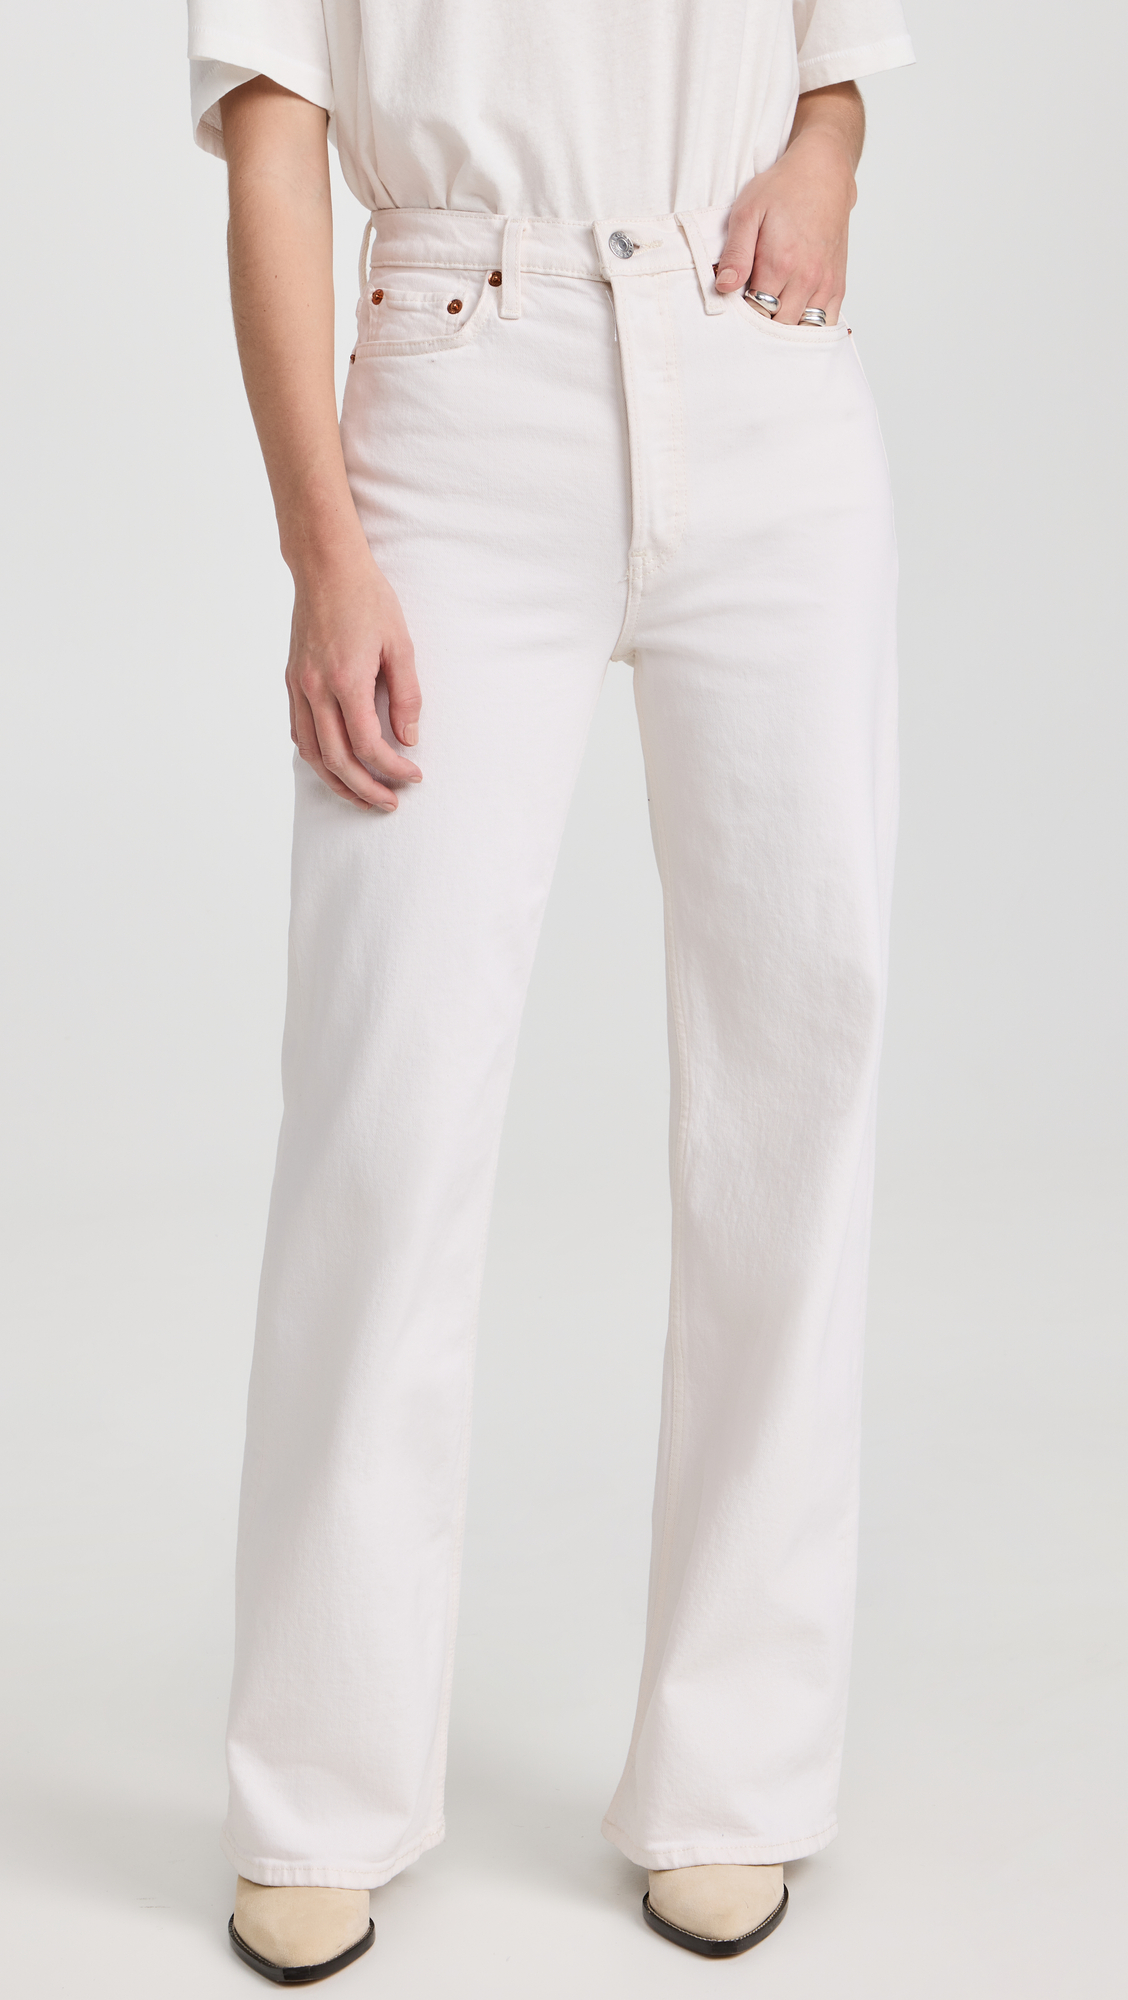 veteraan Op maat Wapenstilstand How to Wear White Jeans: 8 Chic White-Jeans Outfits | Who What Wear